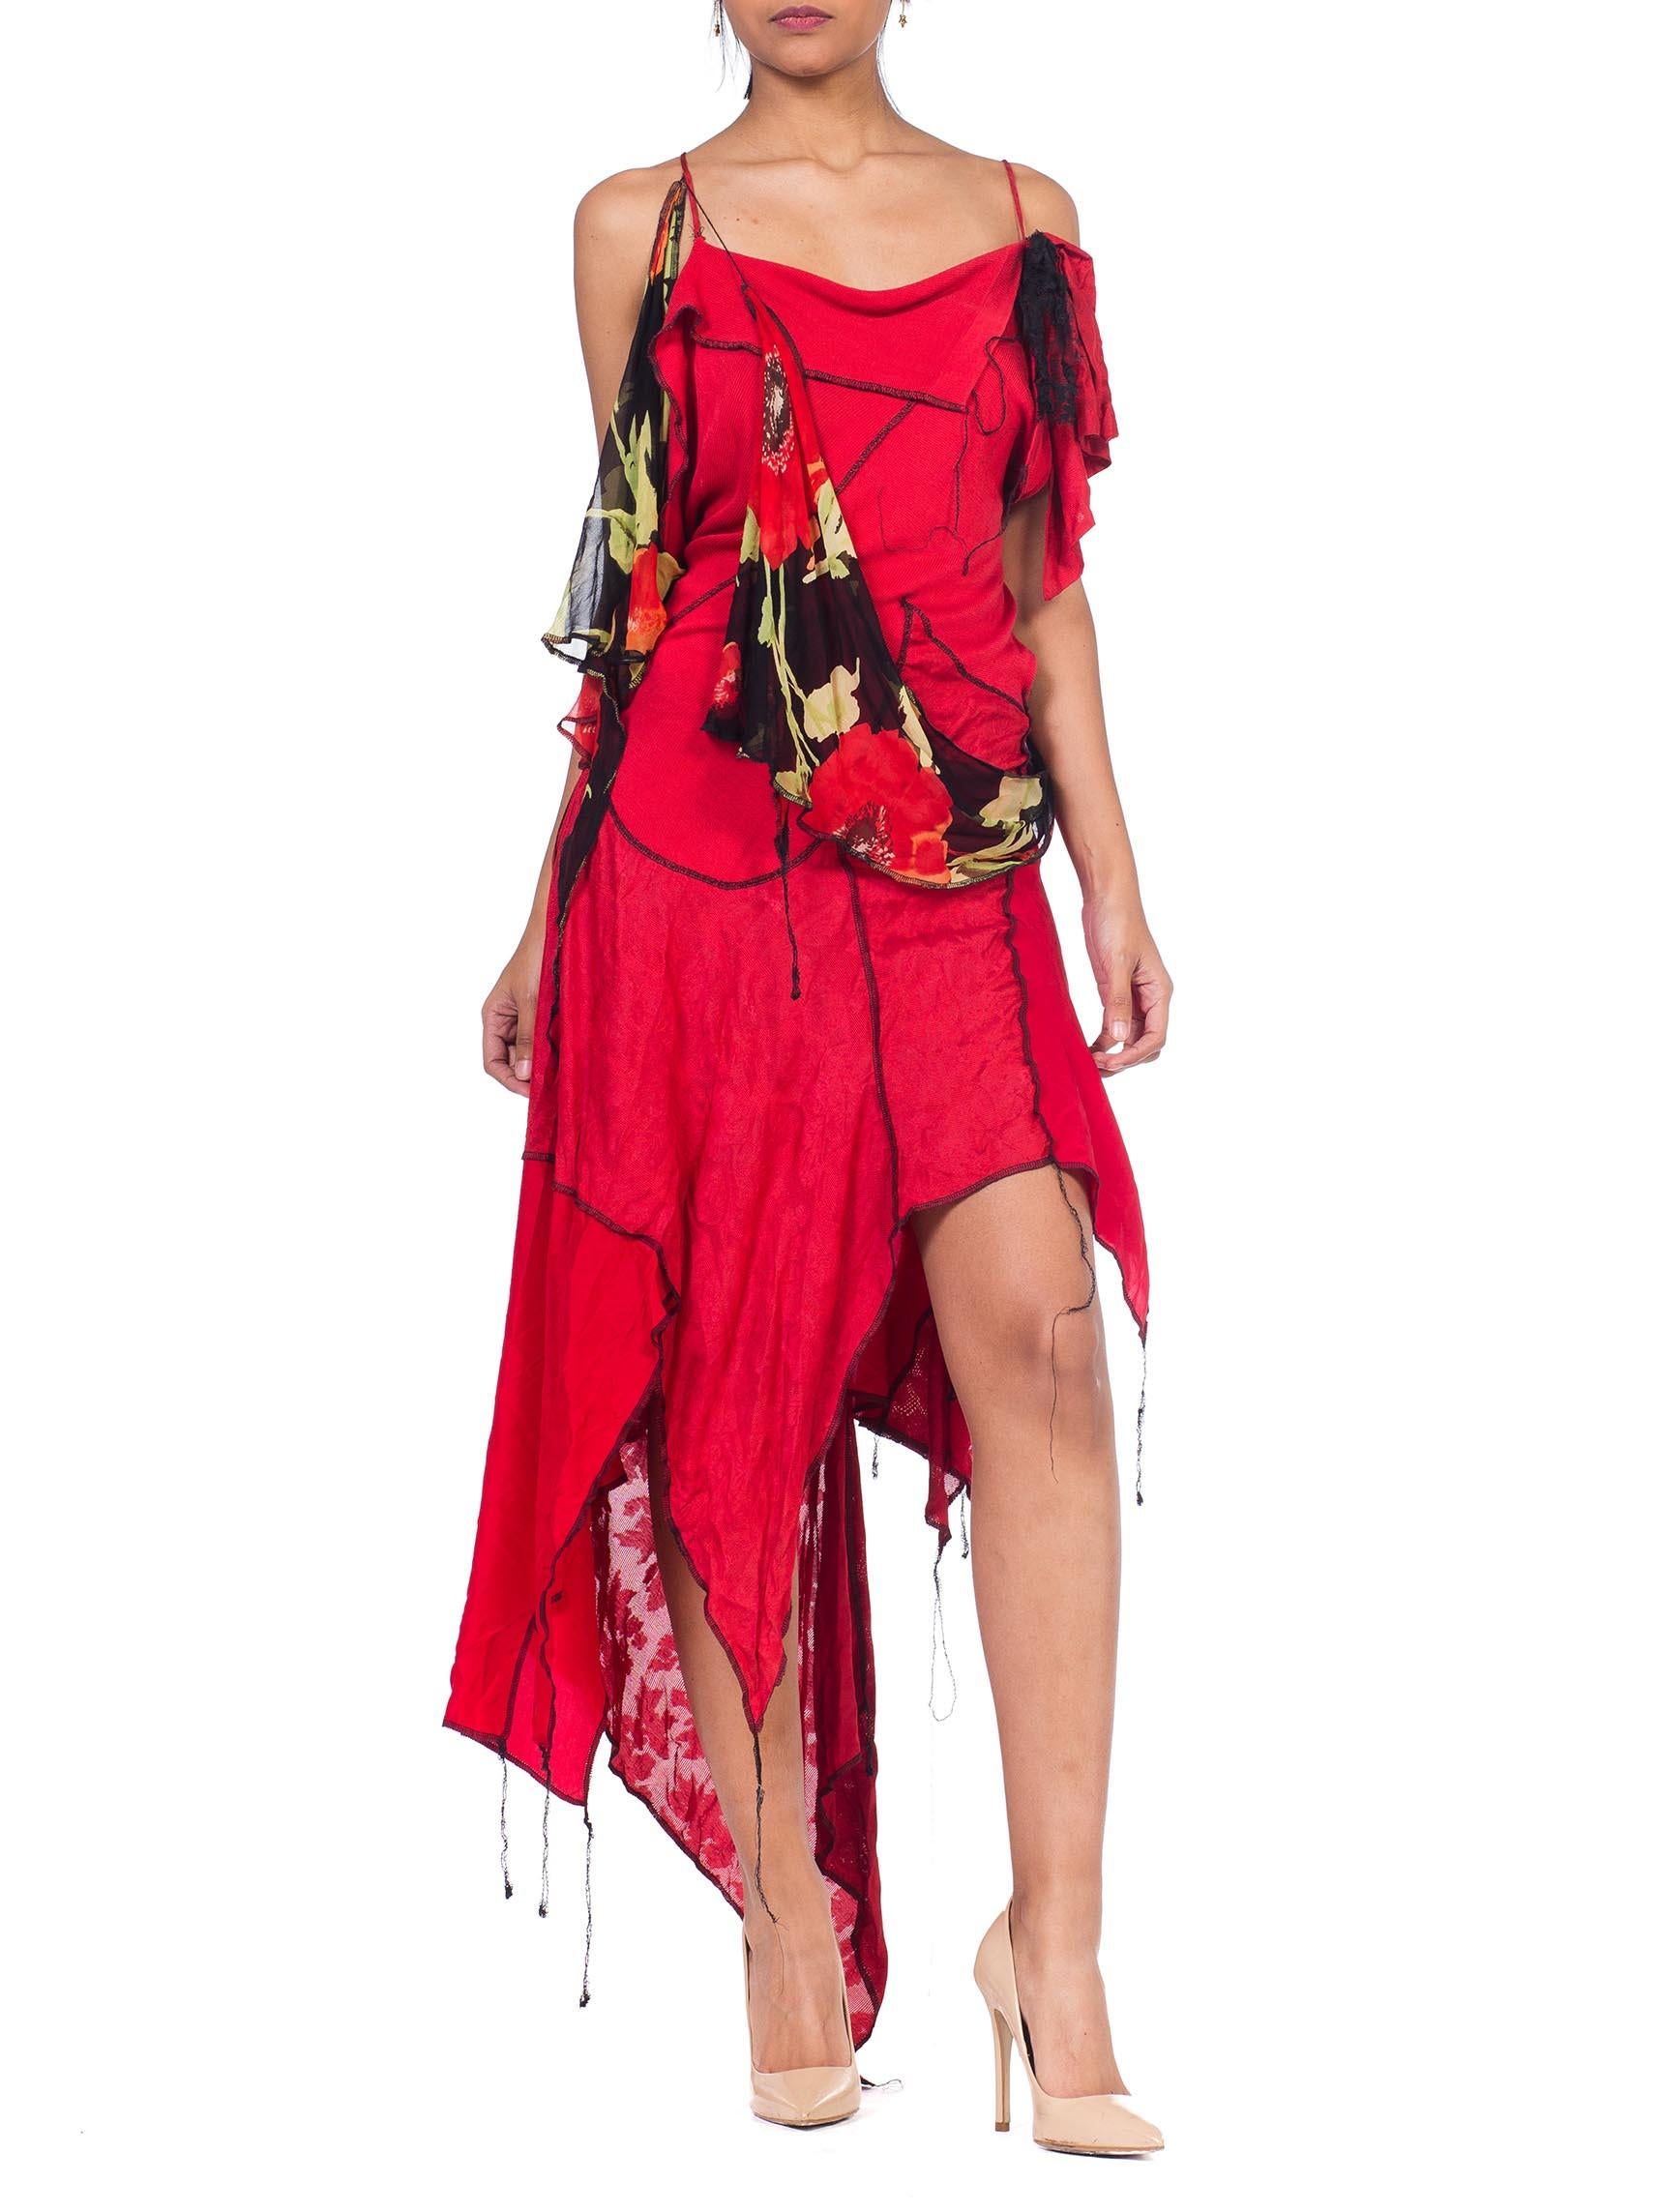 MORPHEW COLLECTION Red 1990S Deconstructed Silk Chiffon & Knit Dress
MORPHEW COLLECTION is made entirely by hand in our NYC Ateliér of rare antique materials sourced from around the globe. Our sustainable vintage materials represent over a century